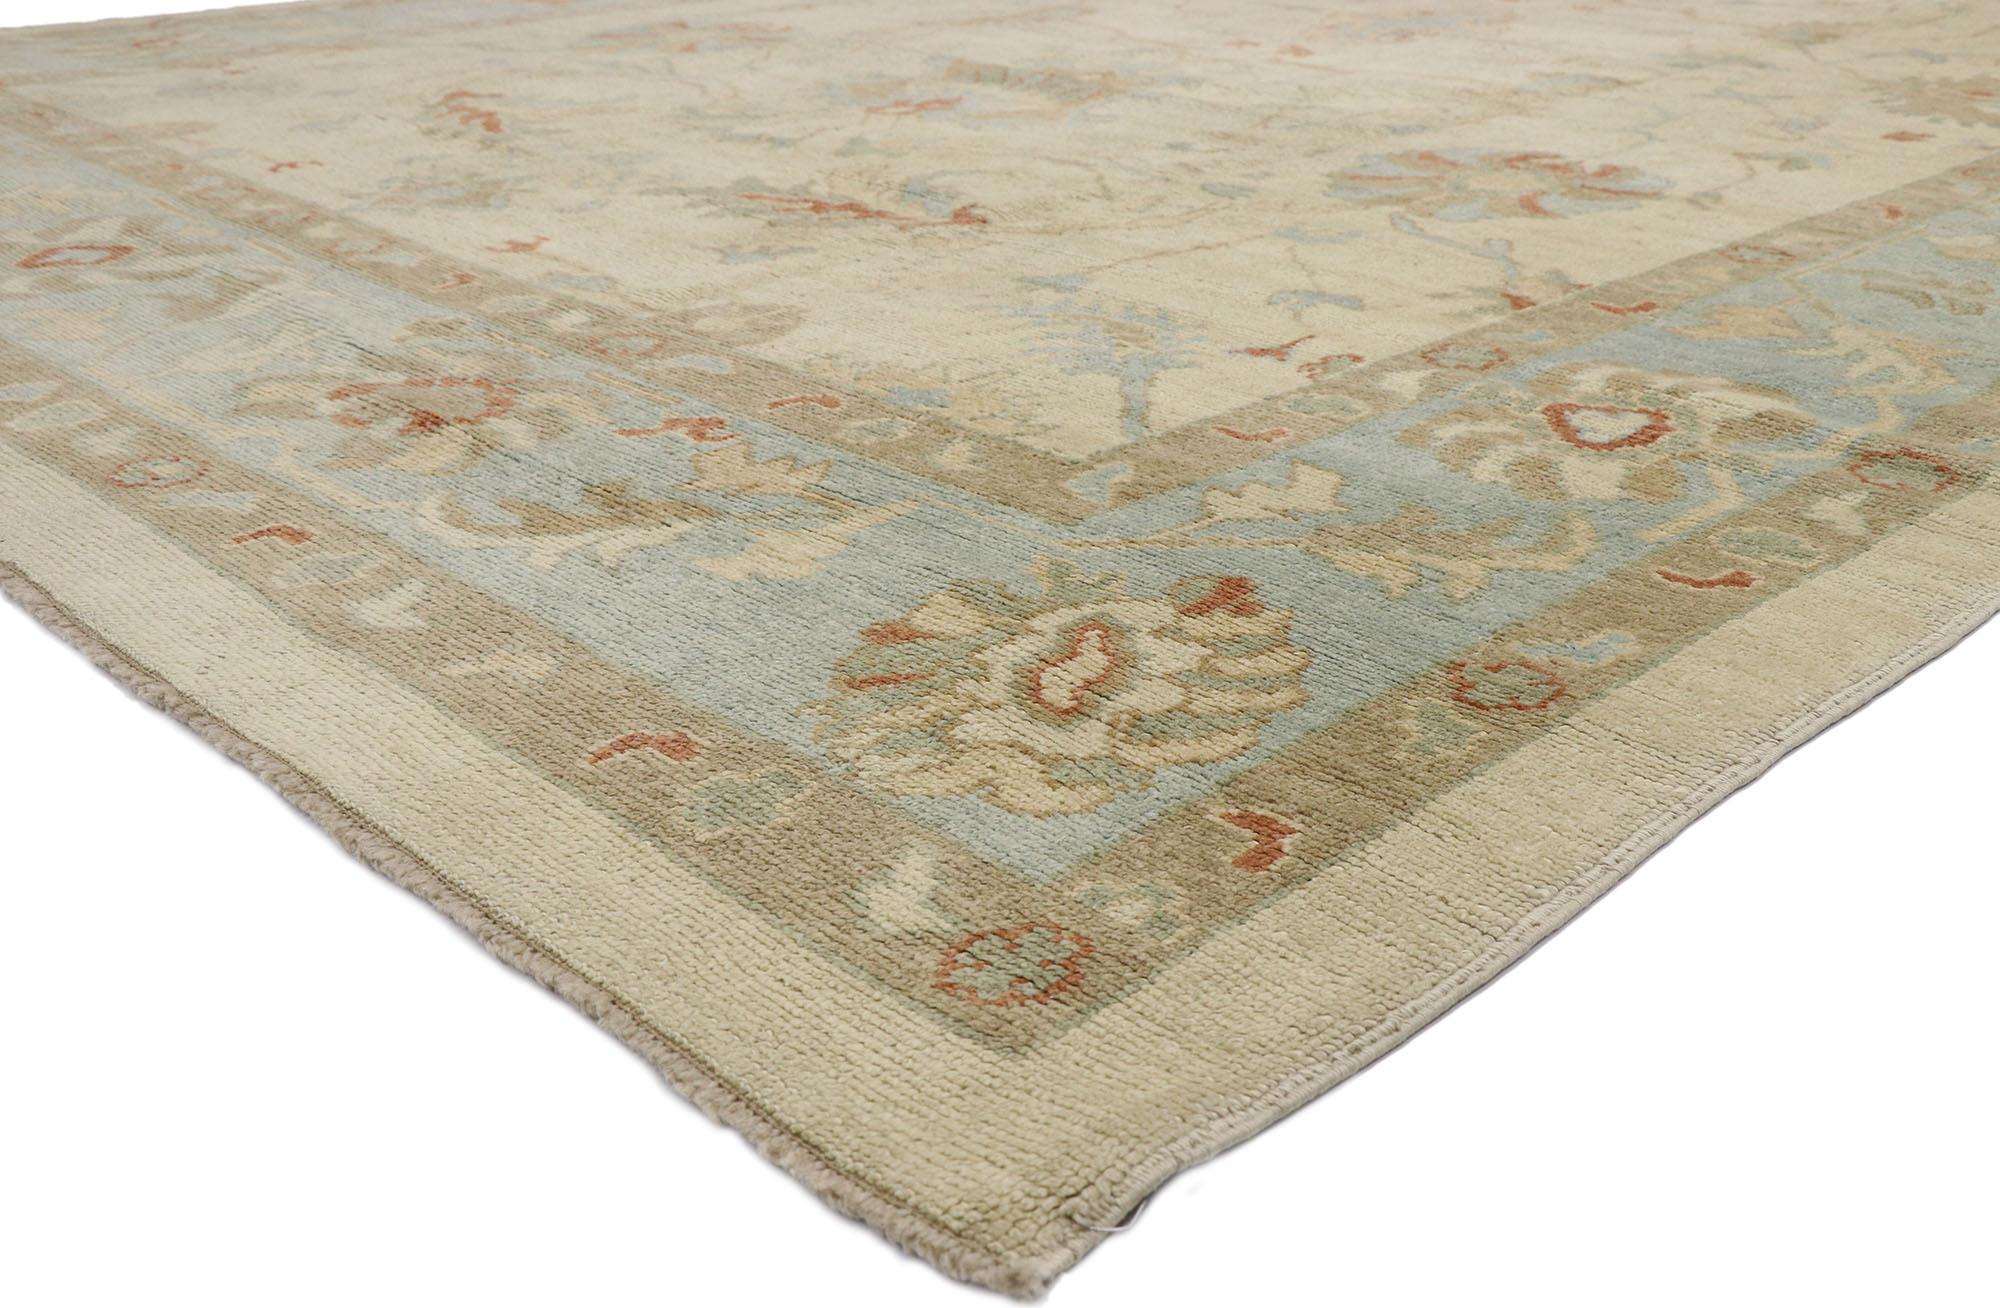 50860 New Contemporary Turkish Oushak rug with modern Coastal style. Blending elements from the modern world with nautical vibes, this hand knotted wool contemporary Turkish Oushak area rug will boost the coziness factor in nearly any space. It